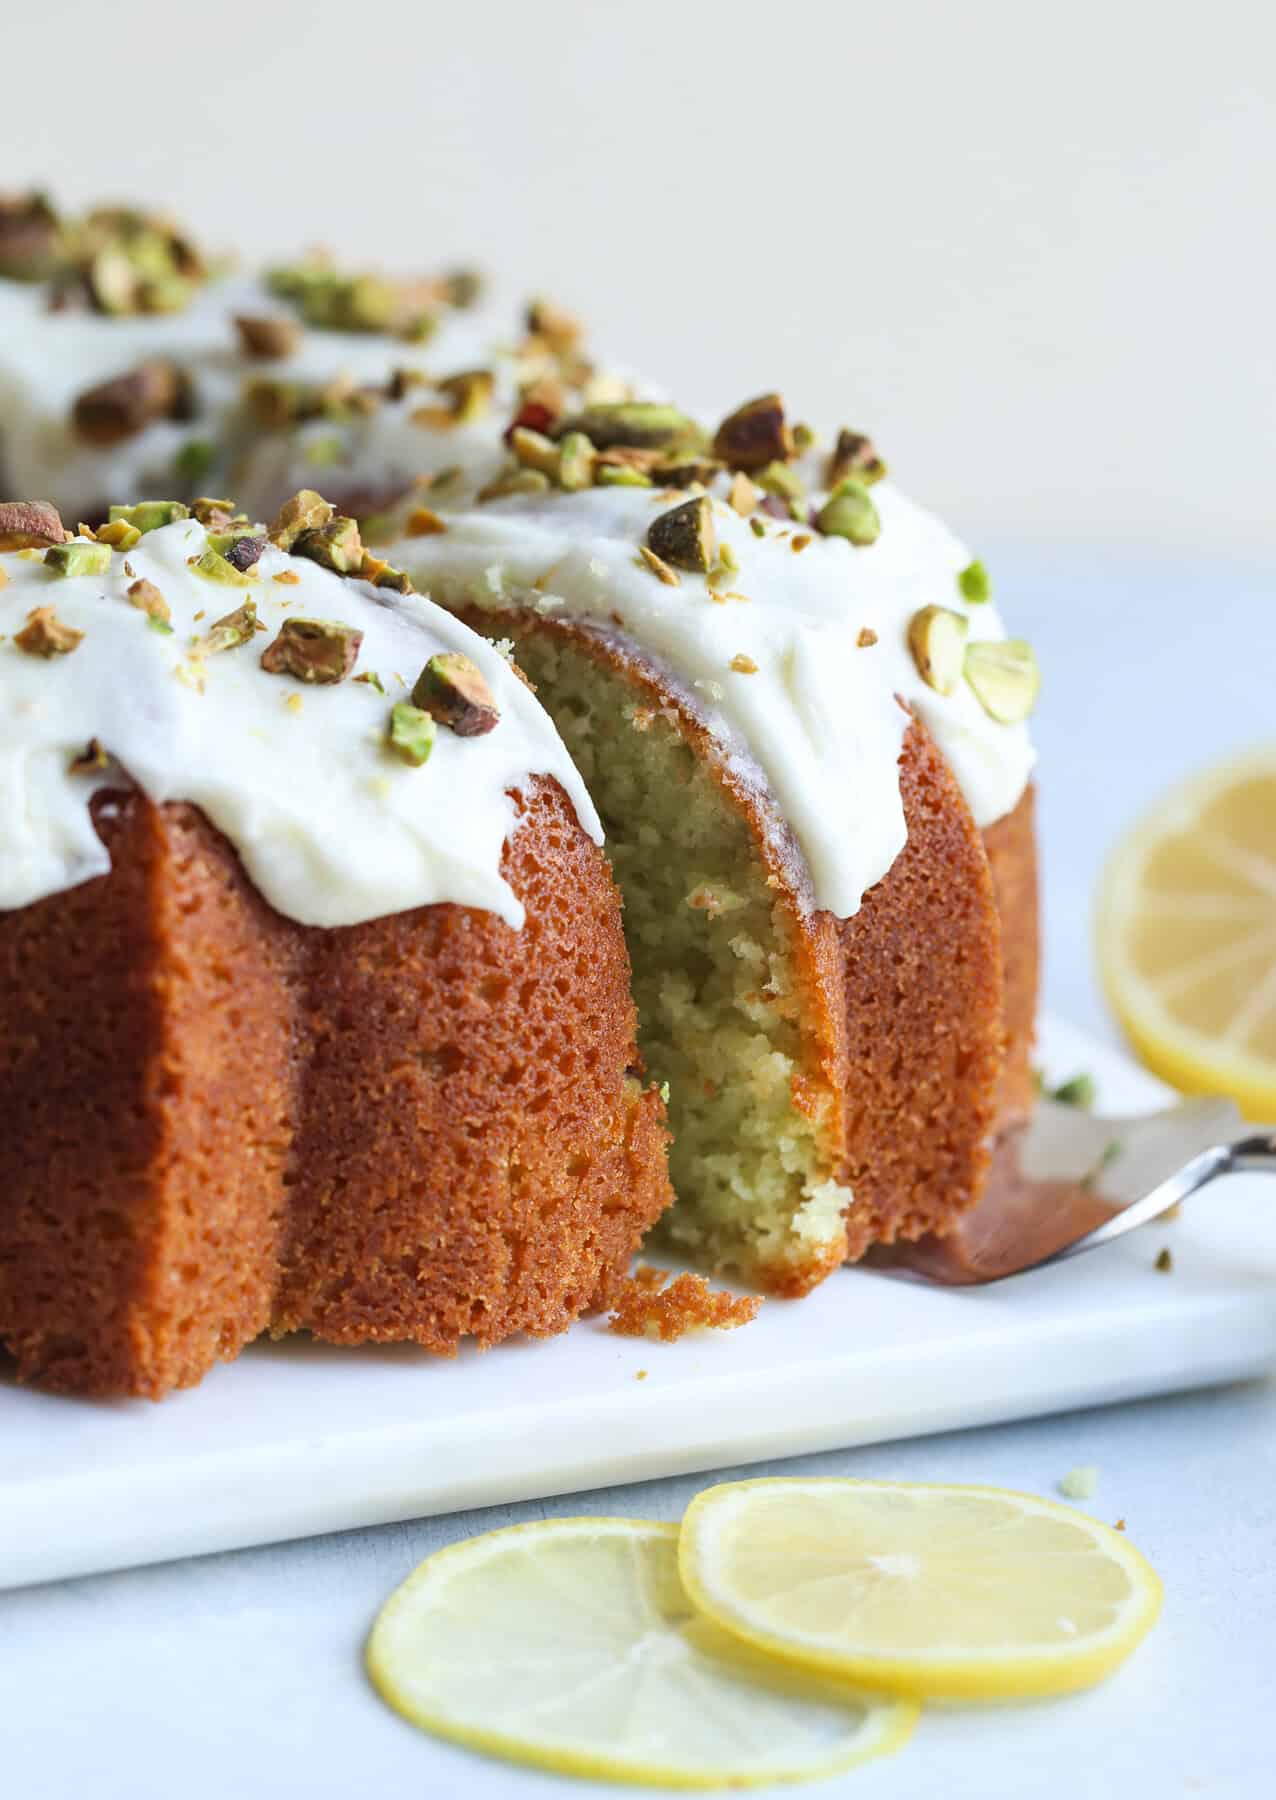 Pistachio Bars With Cream Cheese Frosting - The Hungry Lyoness